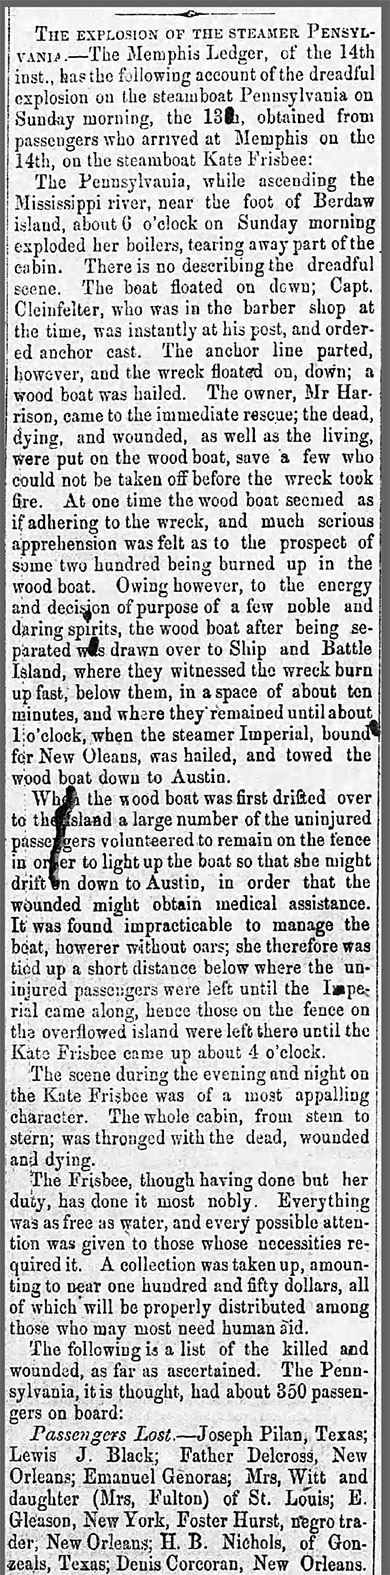 "The explosion of the steamer Pennsylvania" newspaper clipping